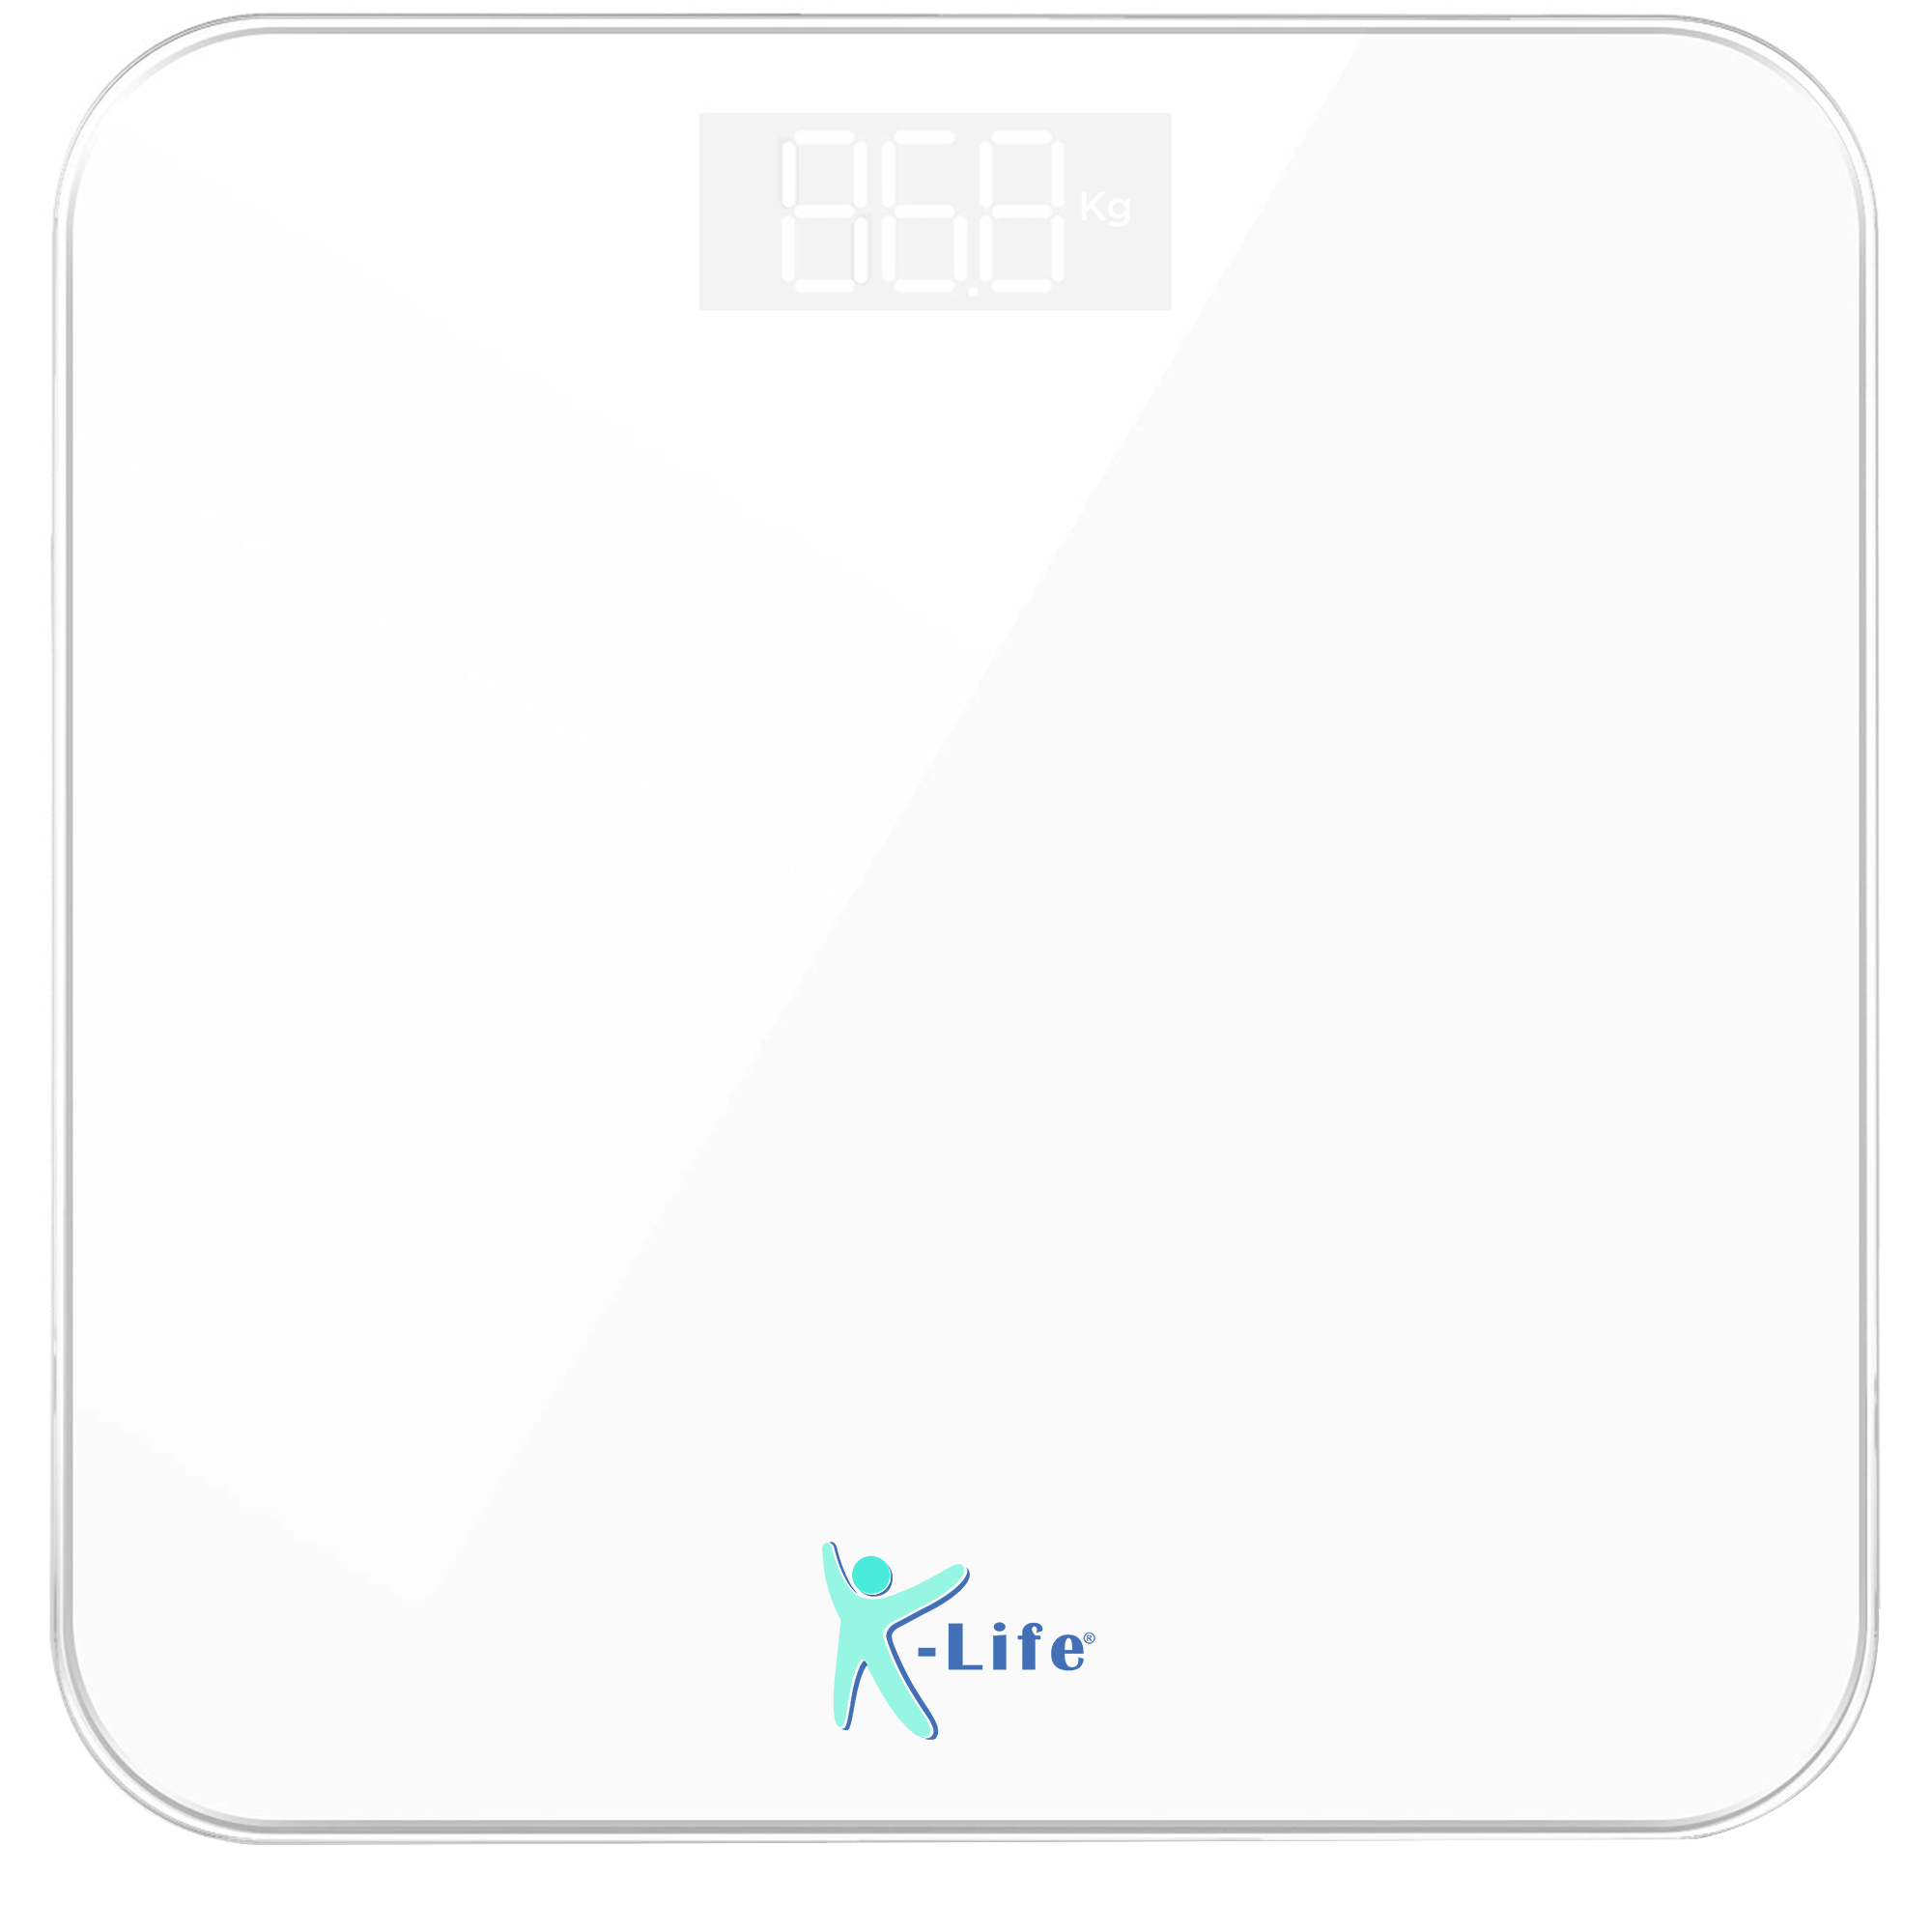 K-Life WS-103 Digital Personal Electronic Body Weight Machine for Human Body 180kg Capacity Weighing Scale, White……